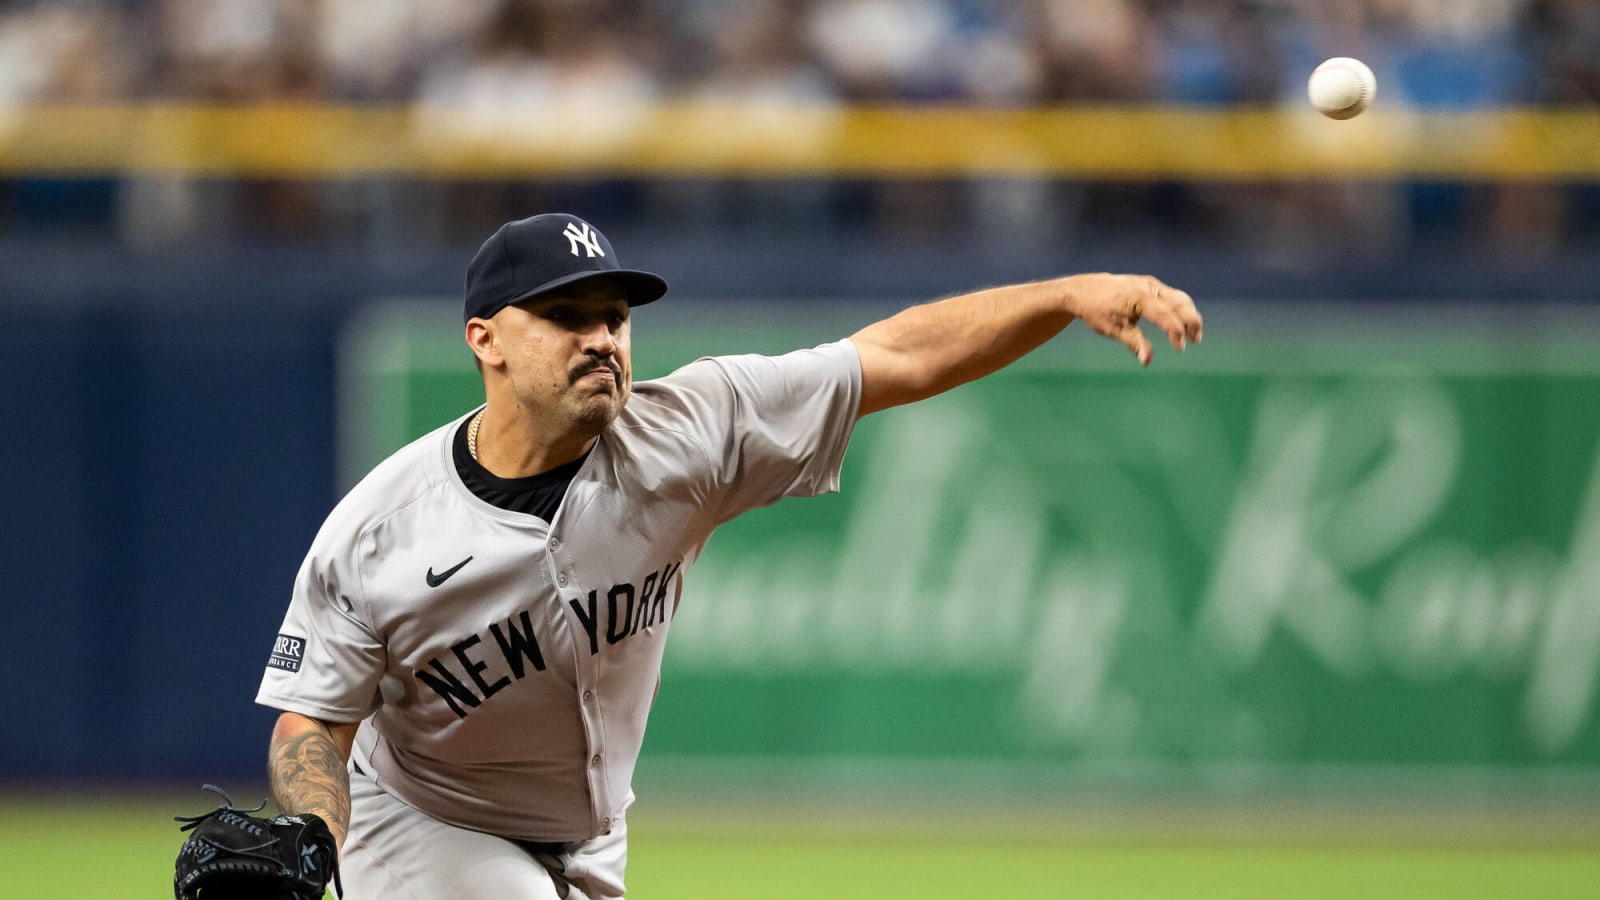 Yankees drop second game of the series to the Rays in 7-2 loss